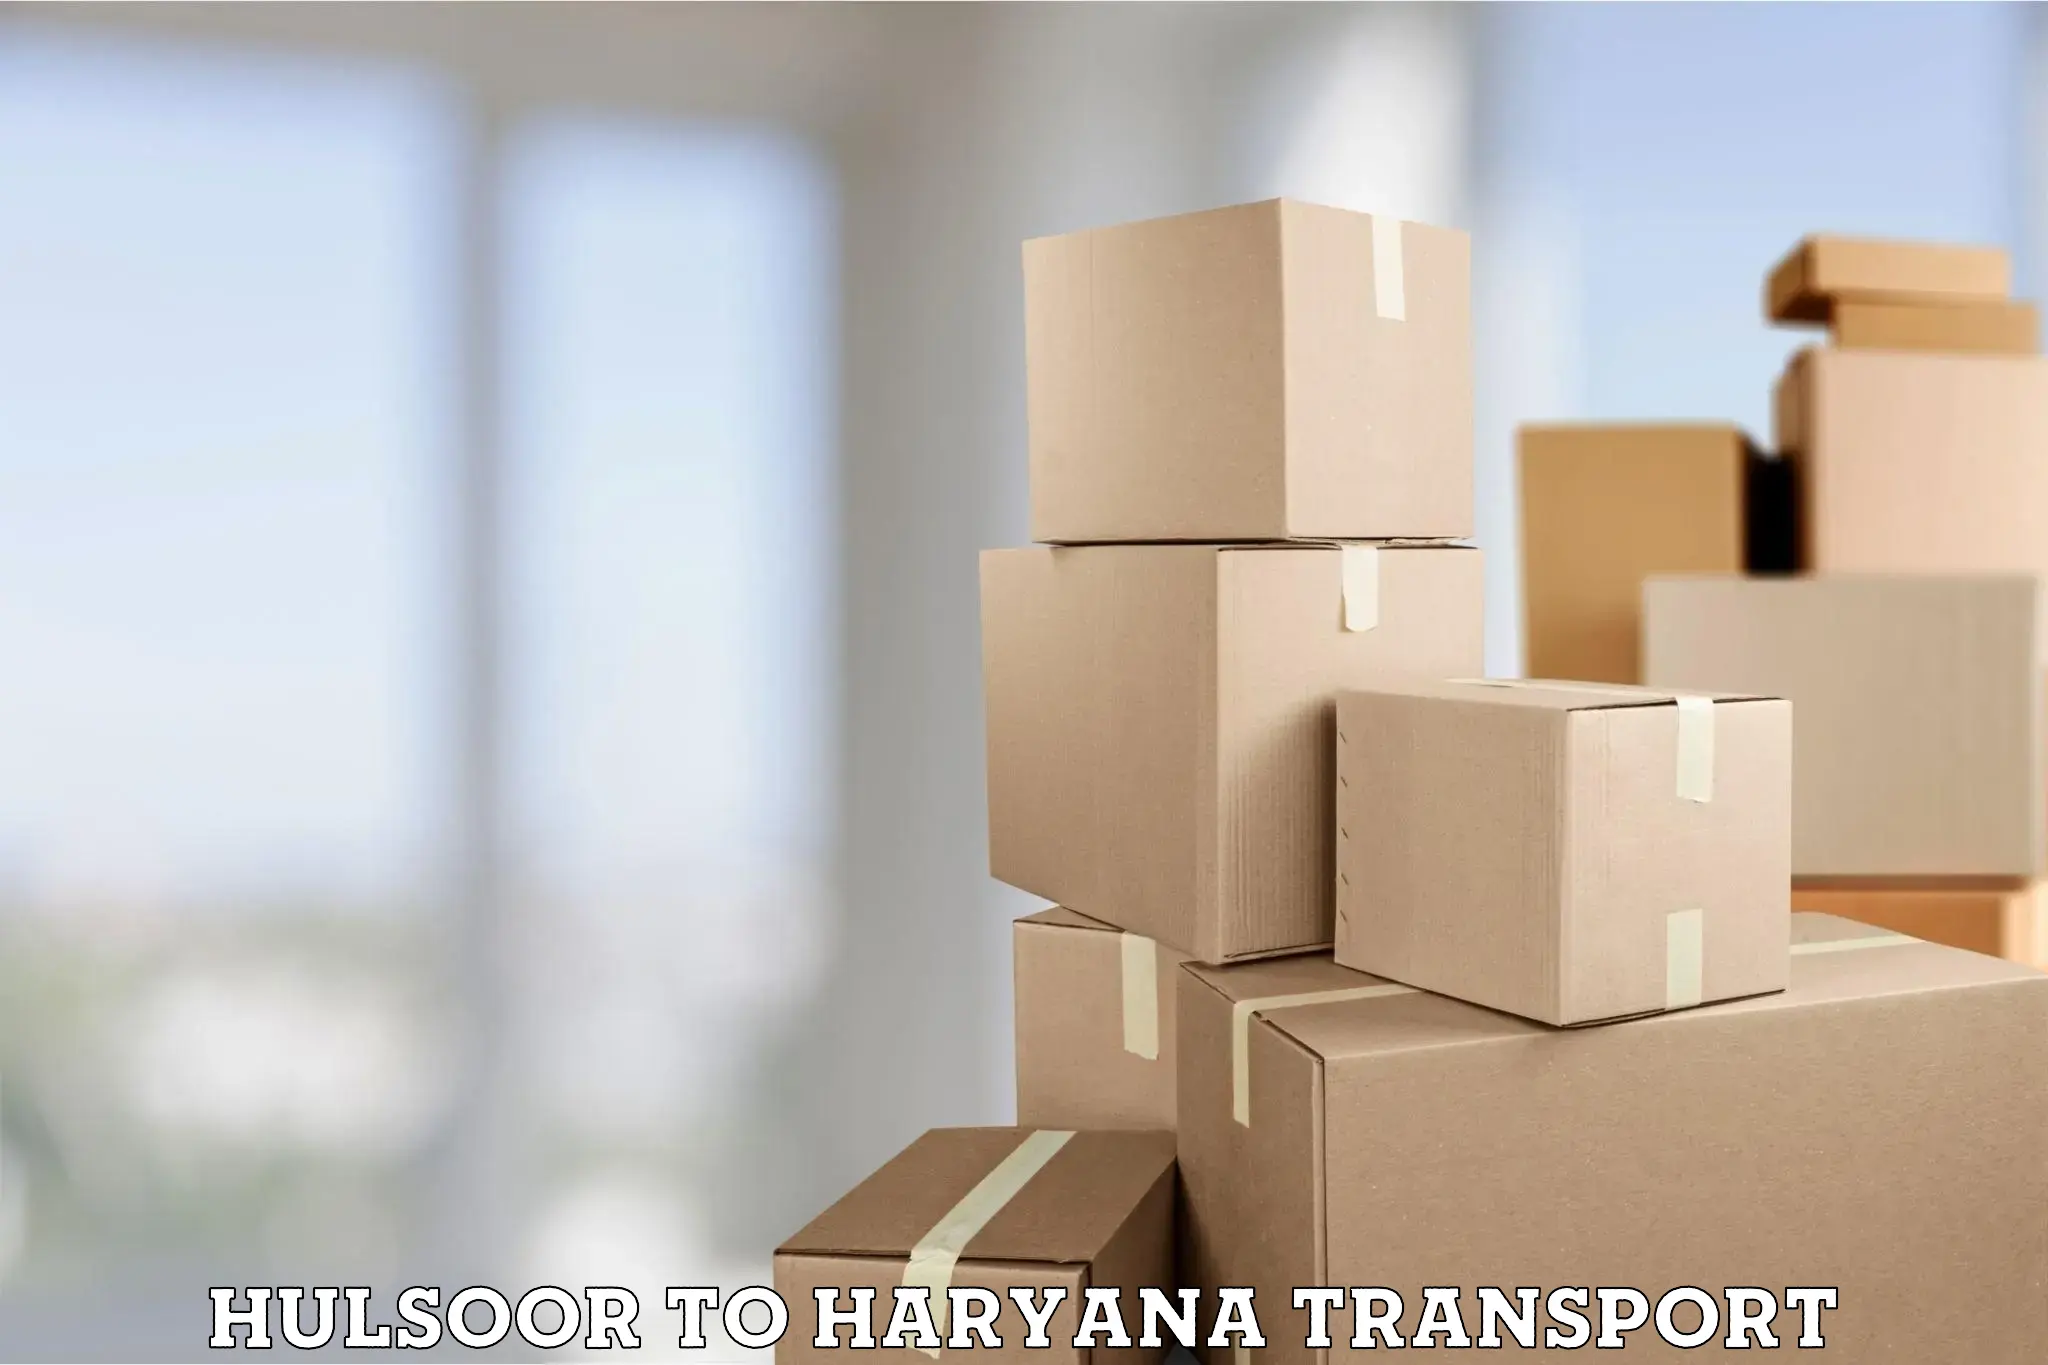 Nearby transport service in Hulsoor to Faridabad